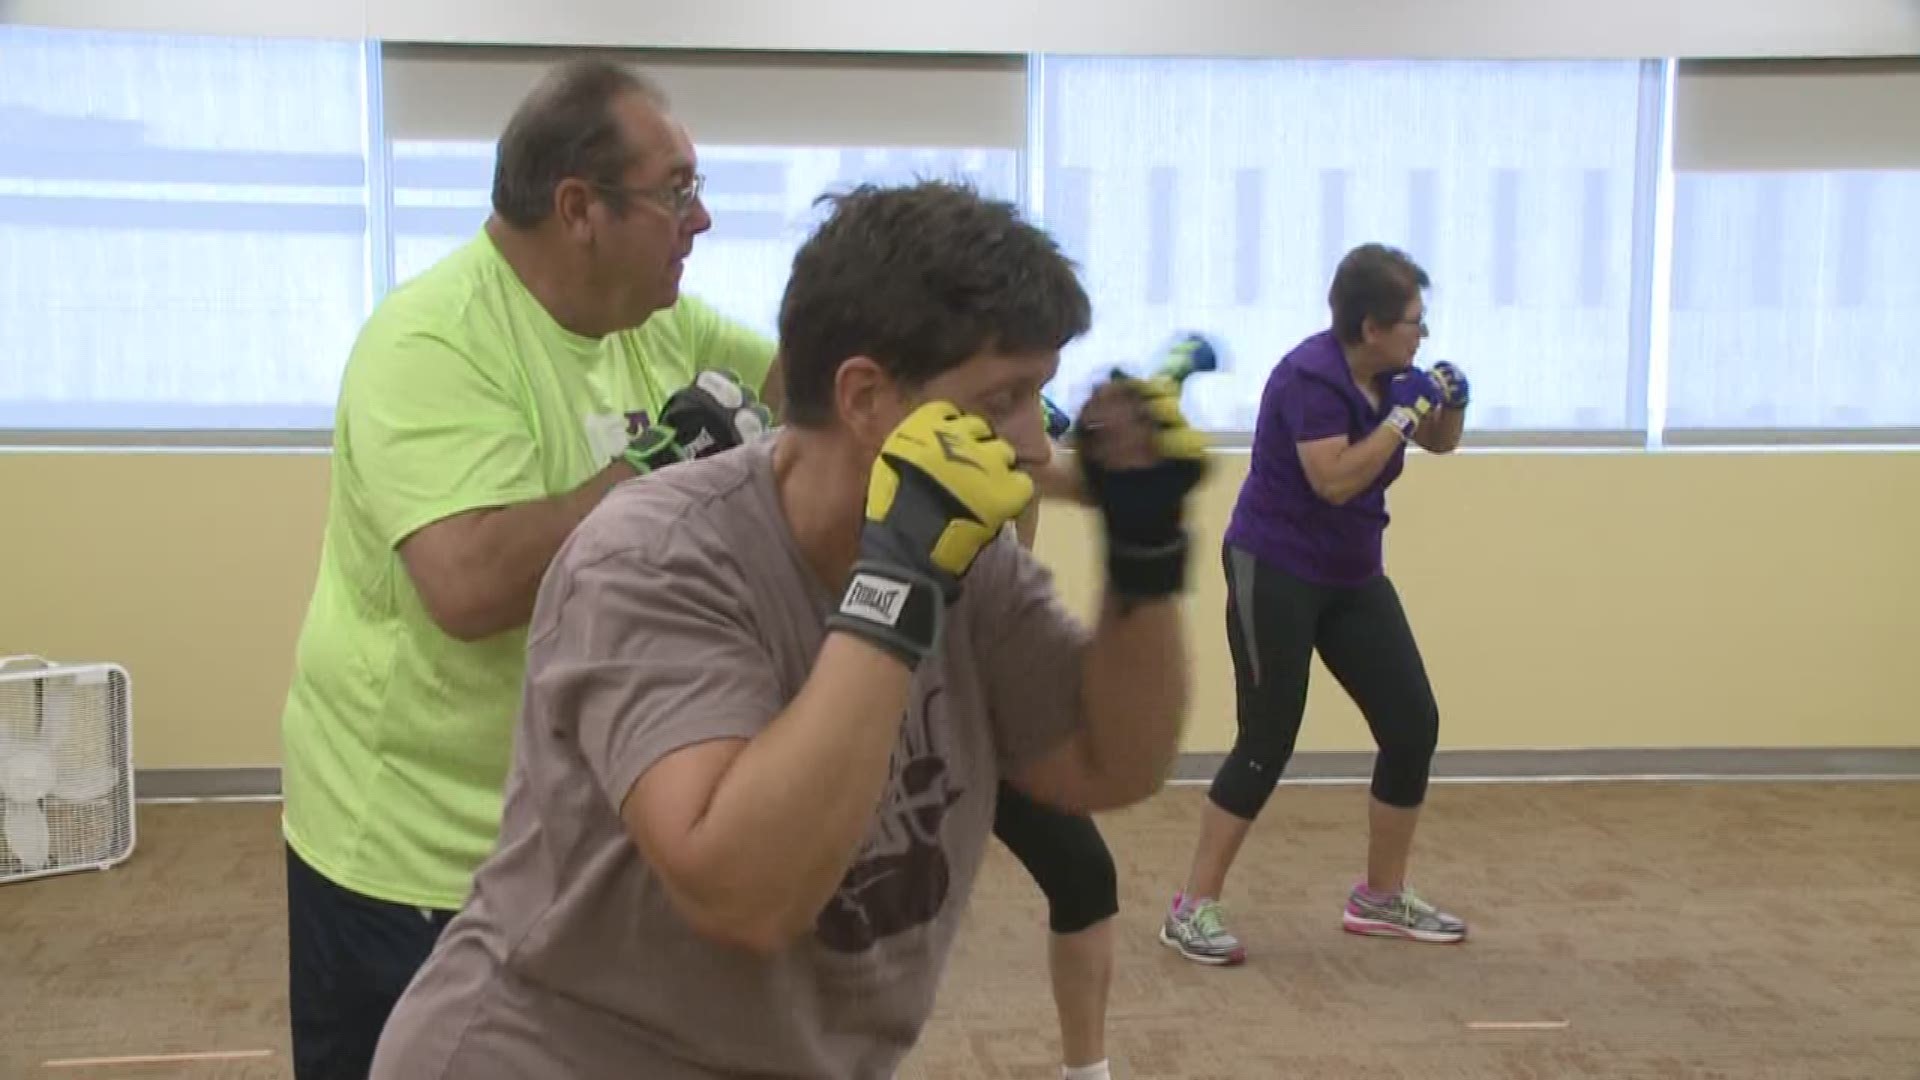 'Knockout' class helps Parkinson patients agility in honor of Muhammad Ali.